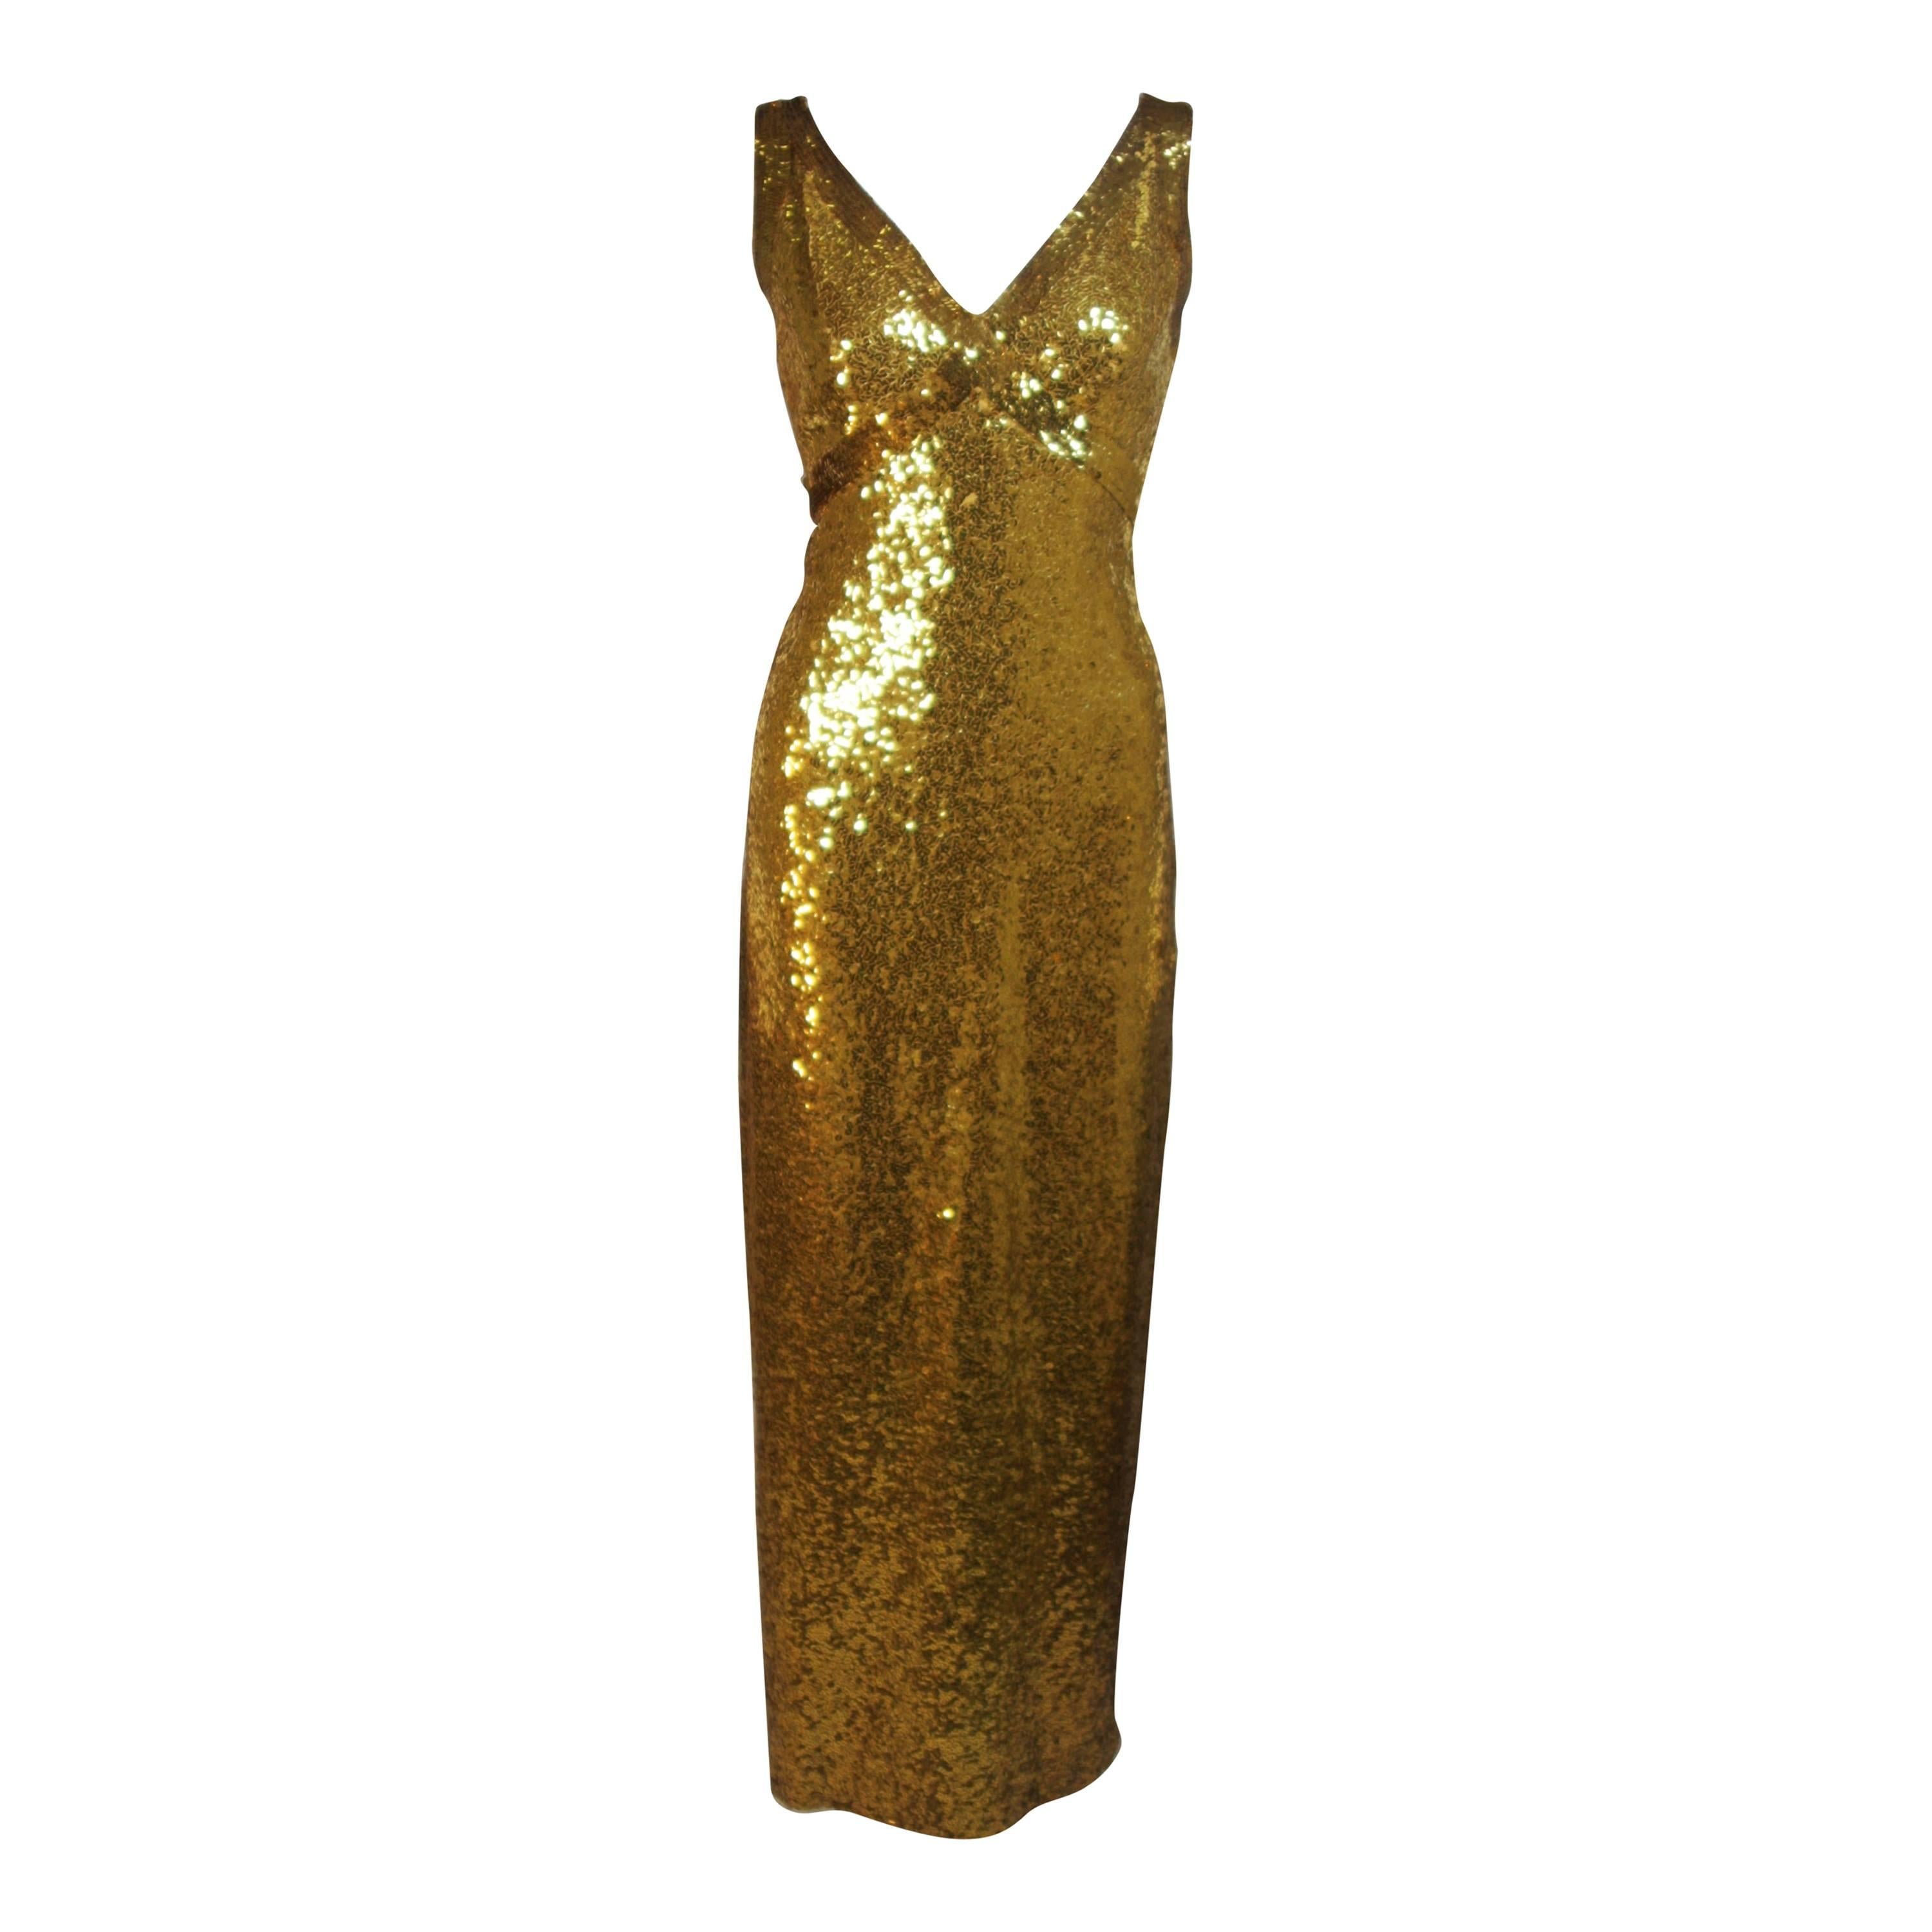 IRENE SARGENT Gold Sequin Gown with Empire Bust Size 6-8